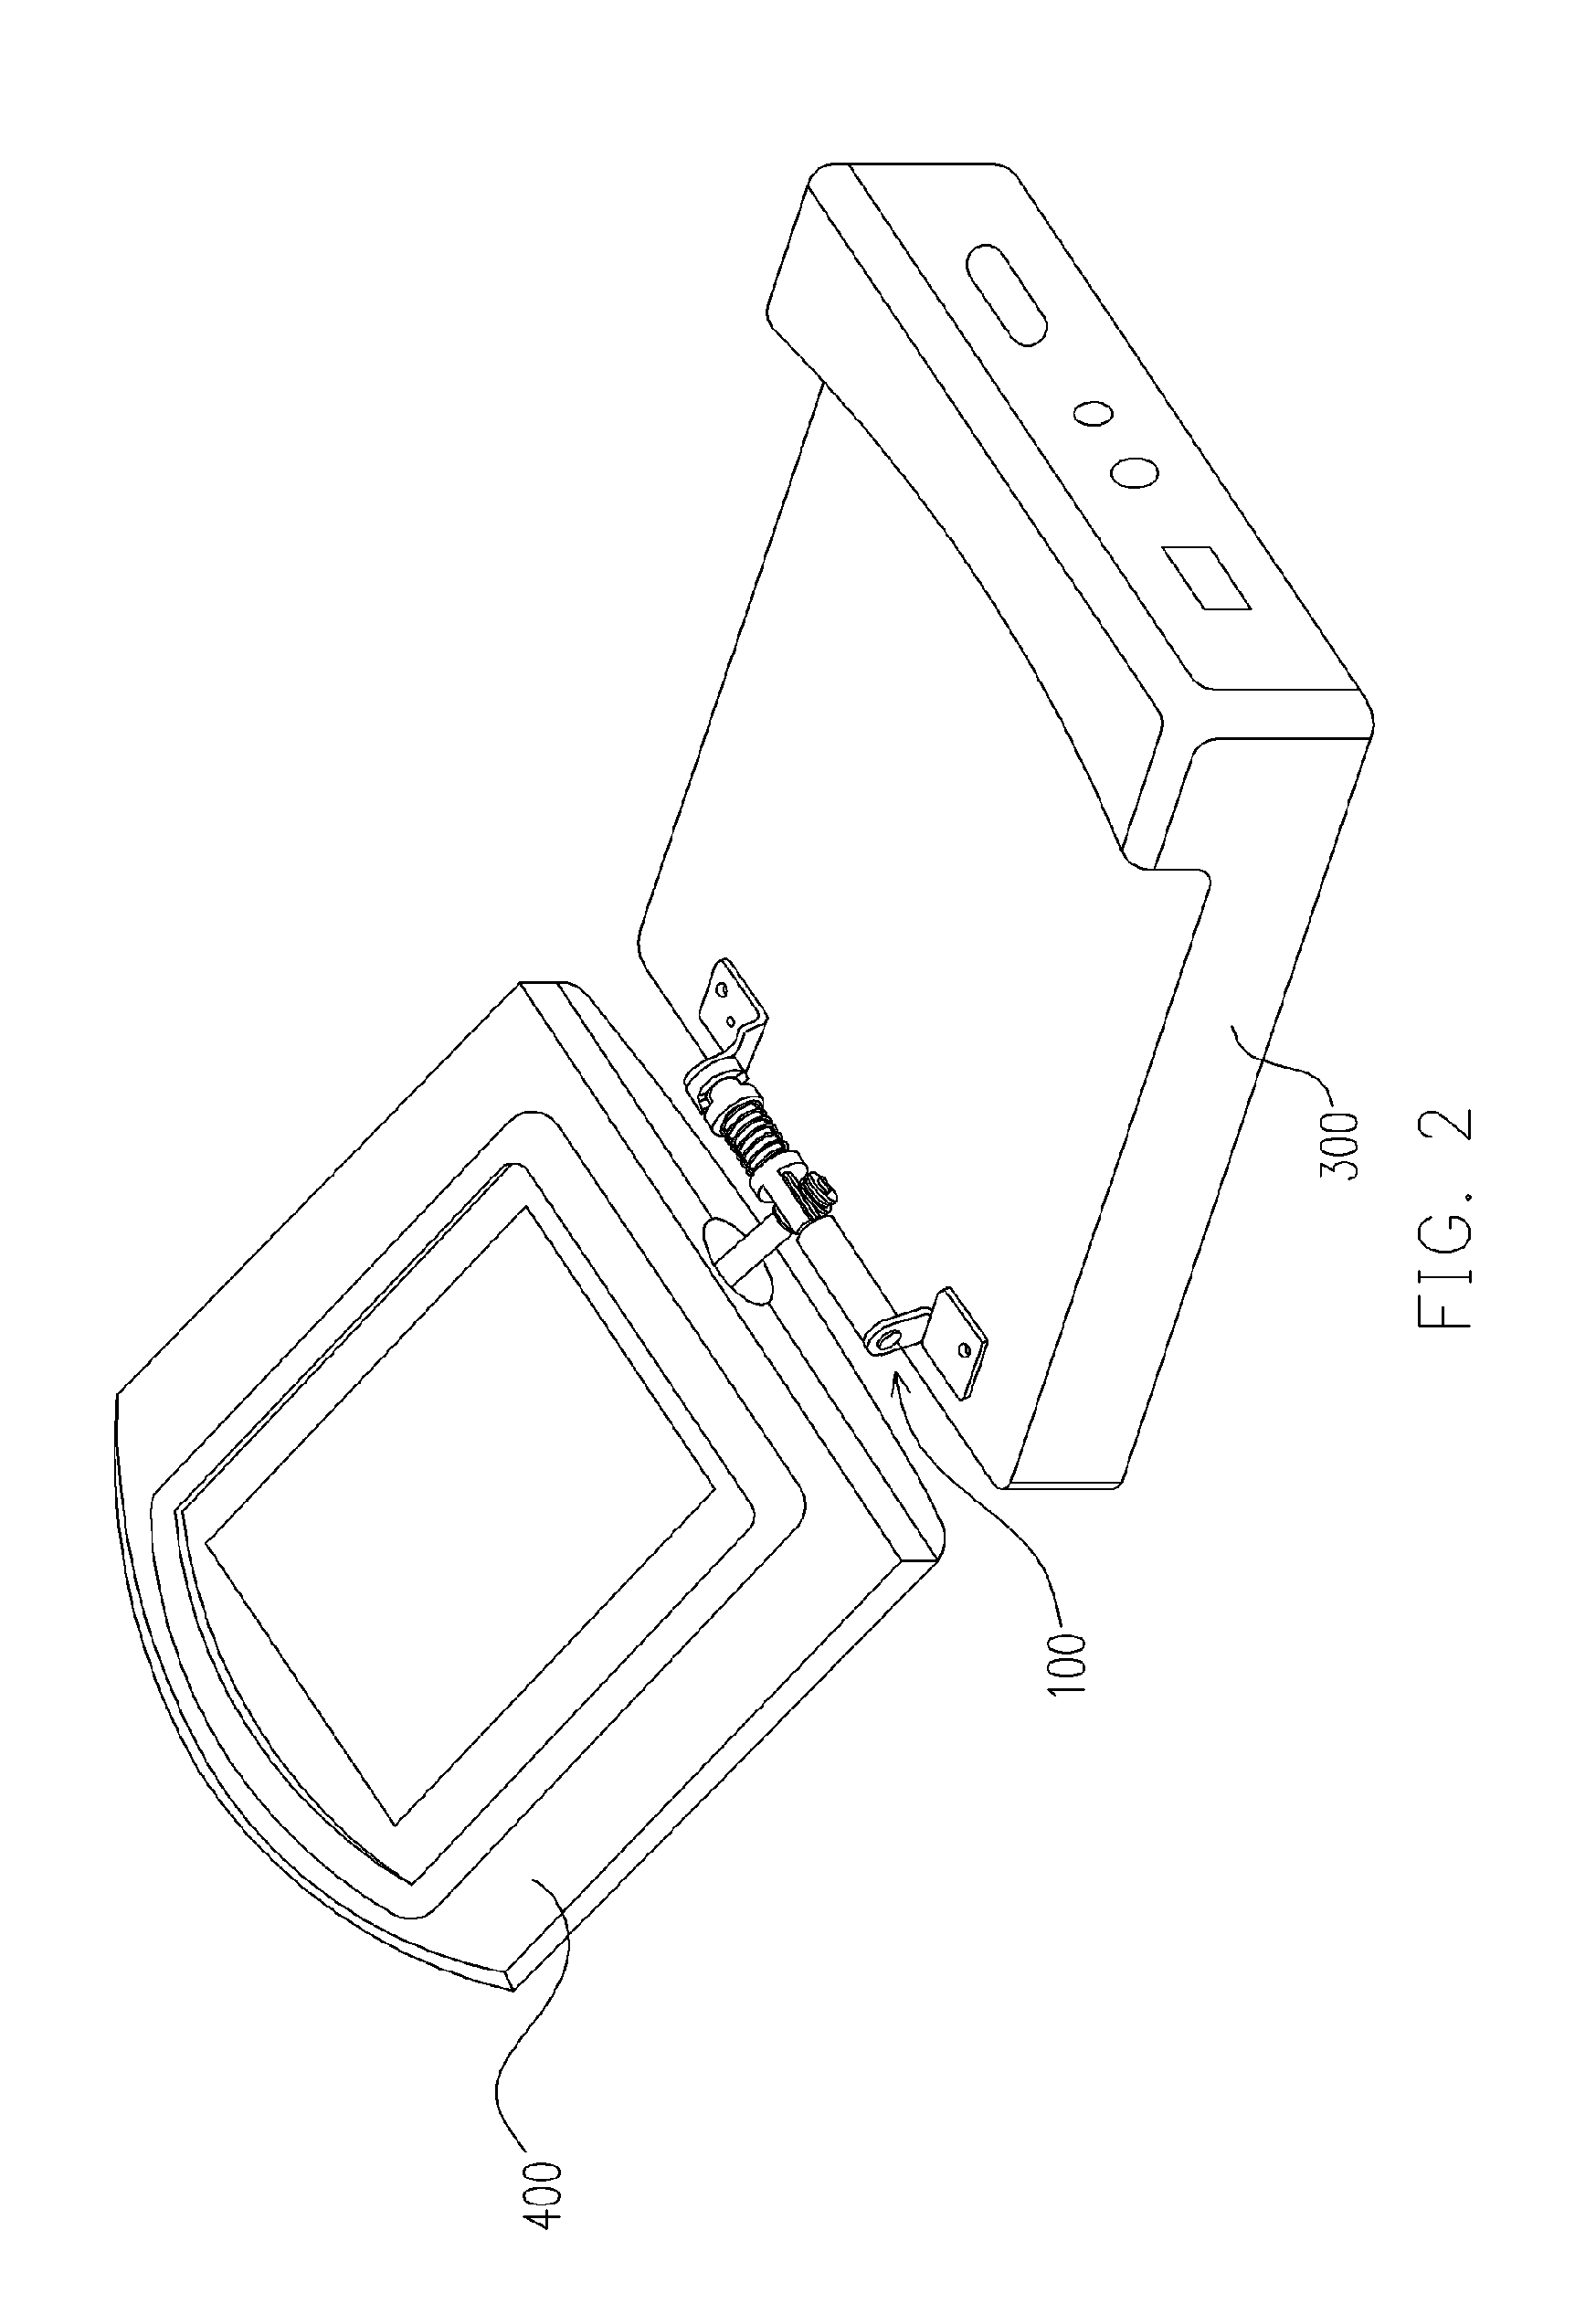 Rotary hinge for rotationally coupling image capturing device with display panel